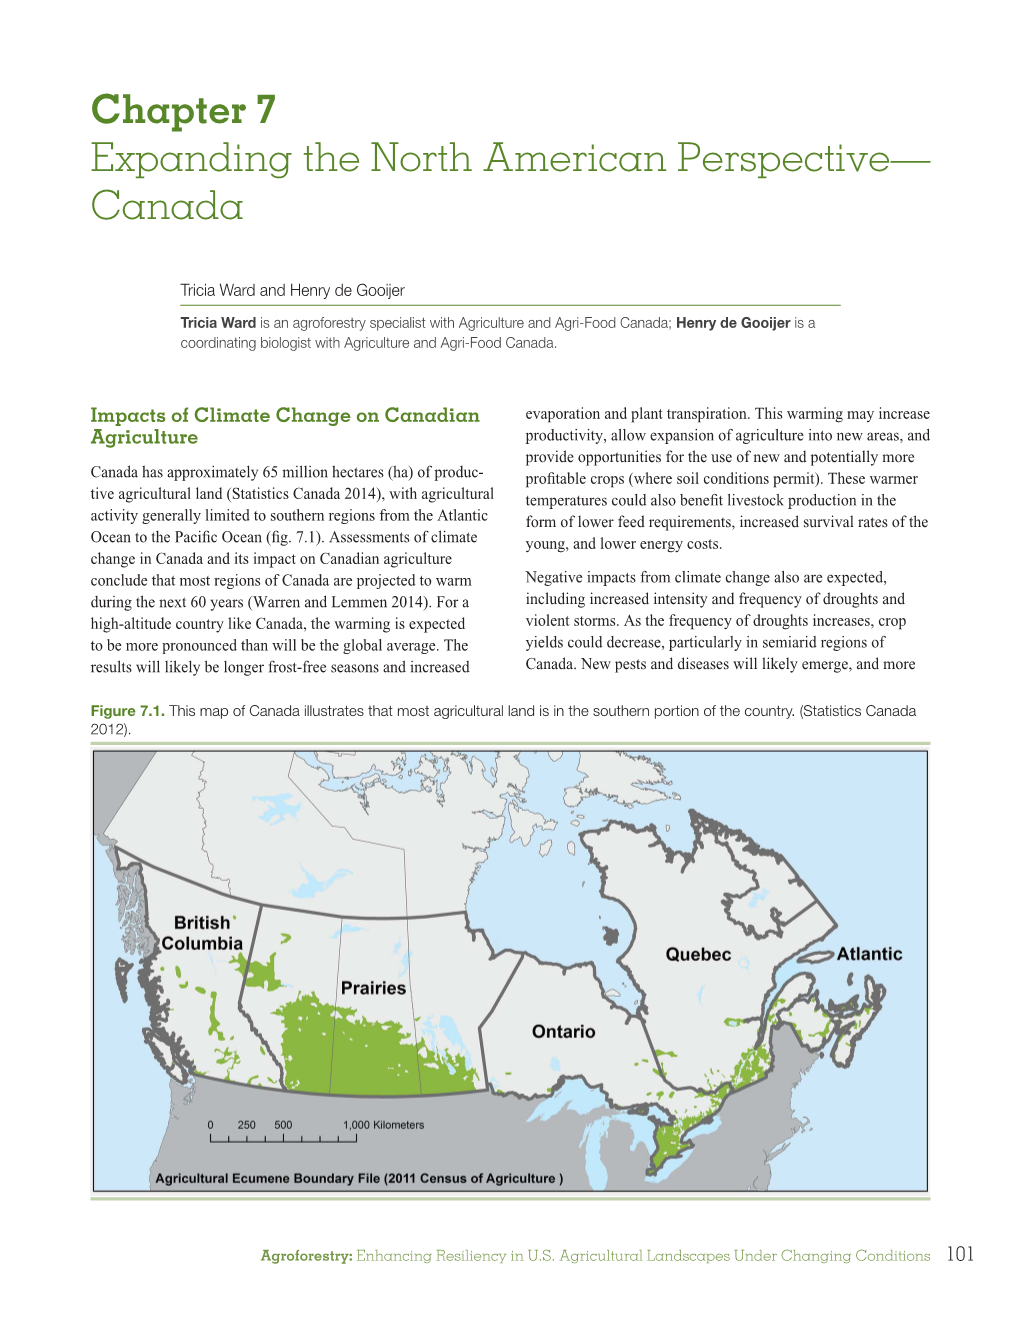 Canada. In: Agroforestry